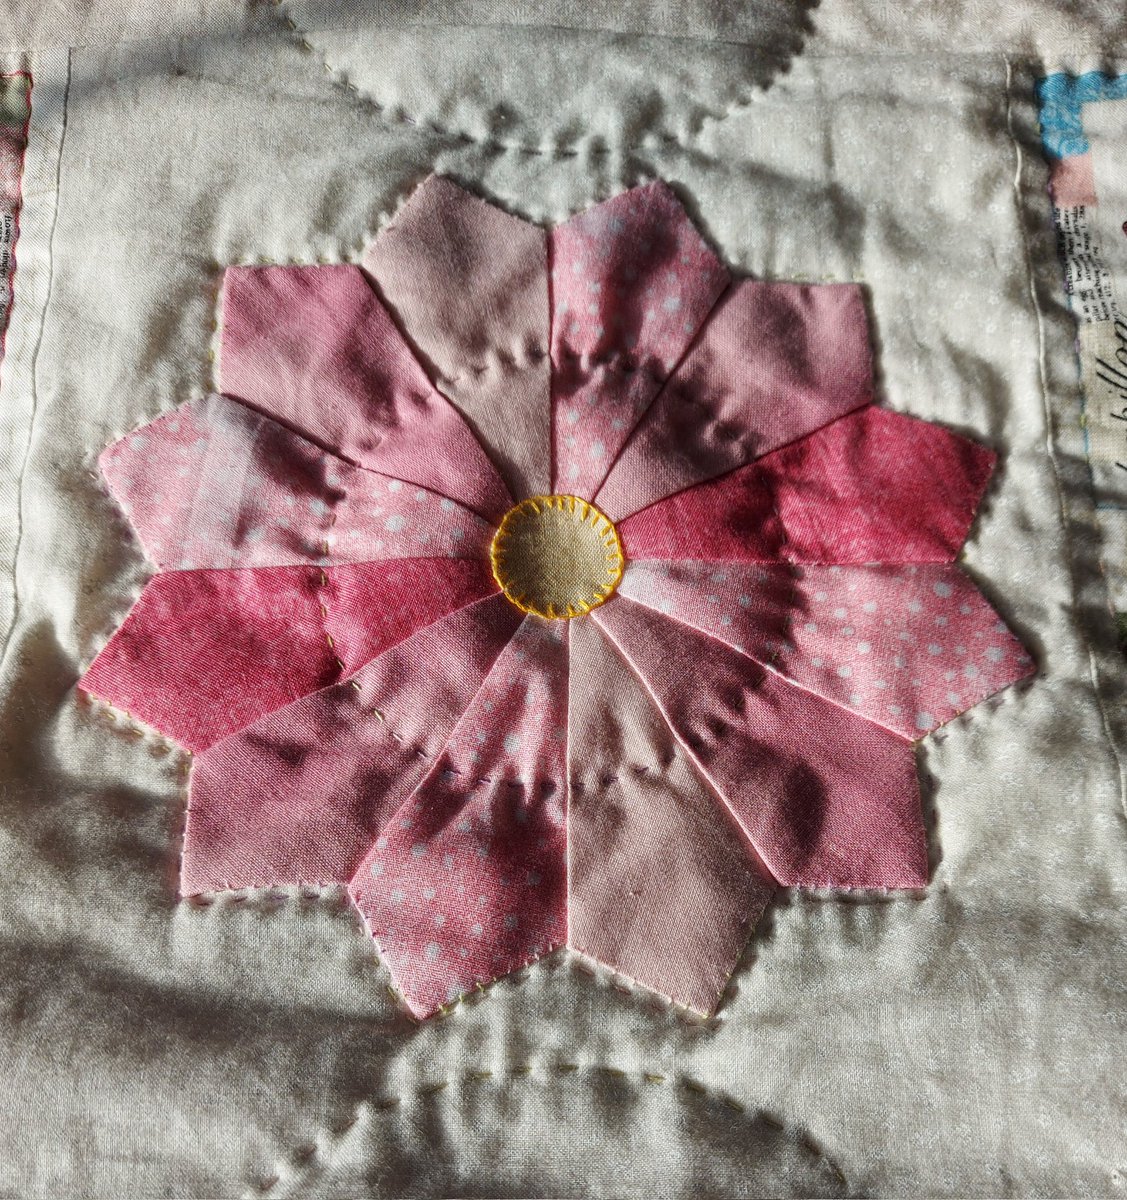 The only flowers today are those I've been quilting. 

#flowers #fabricflowers